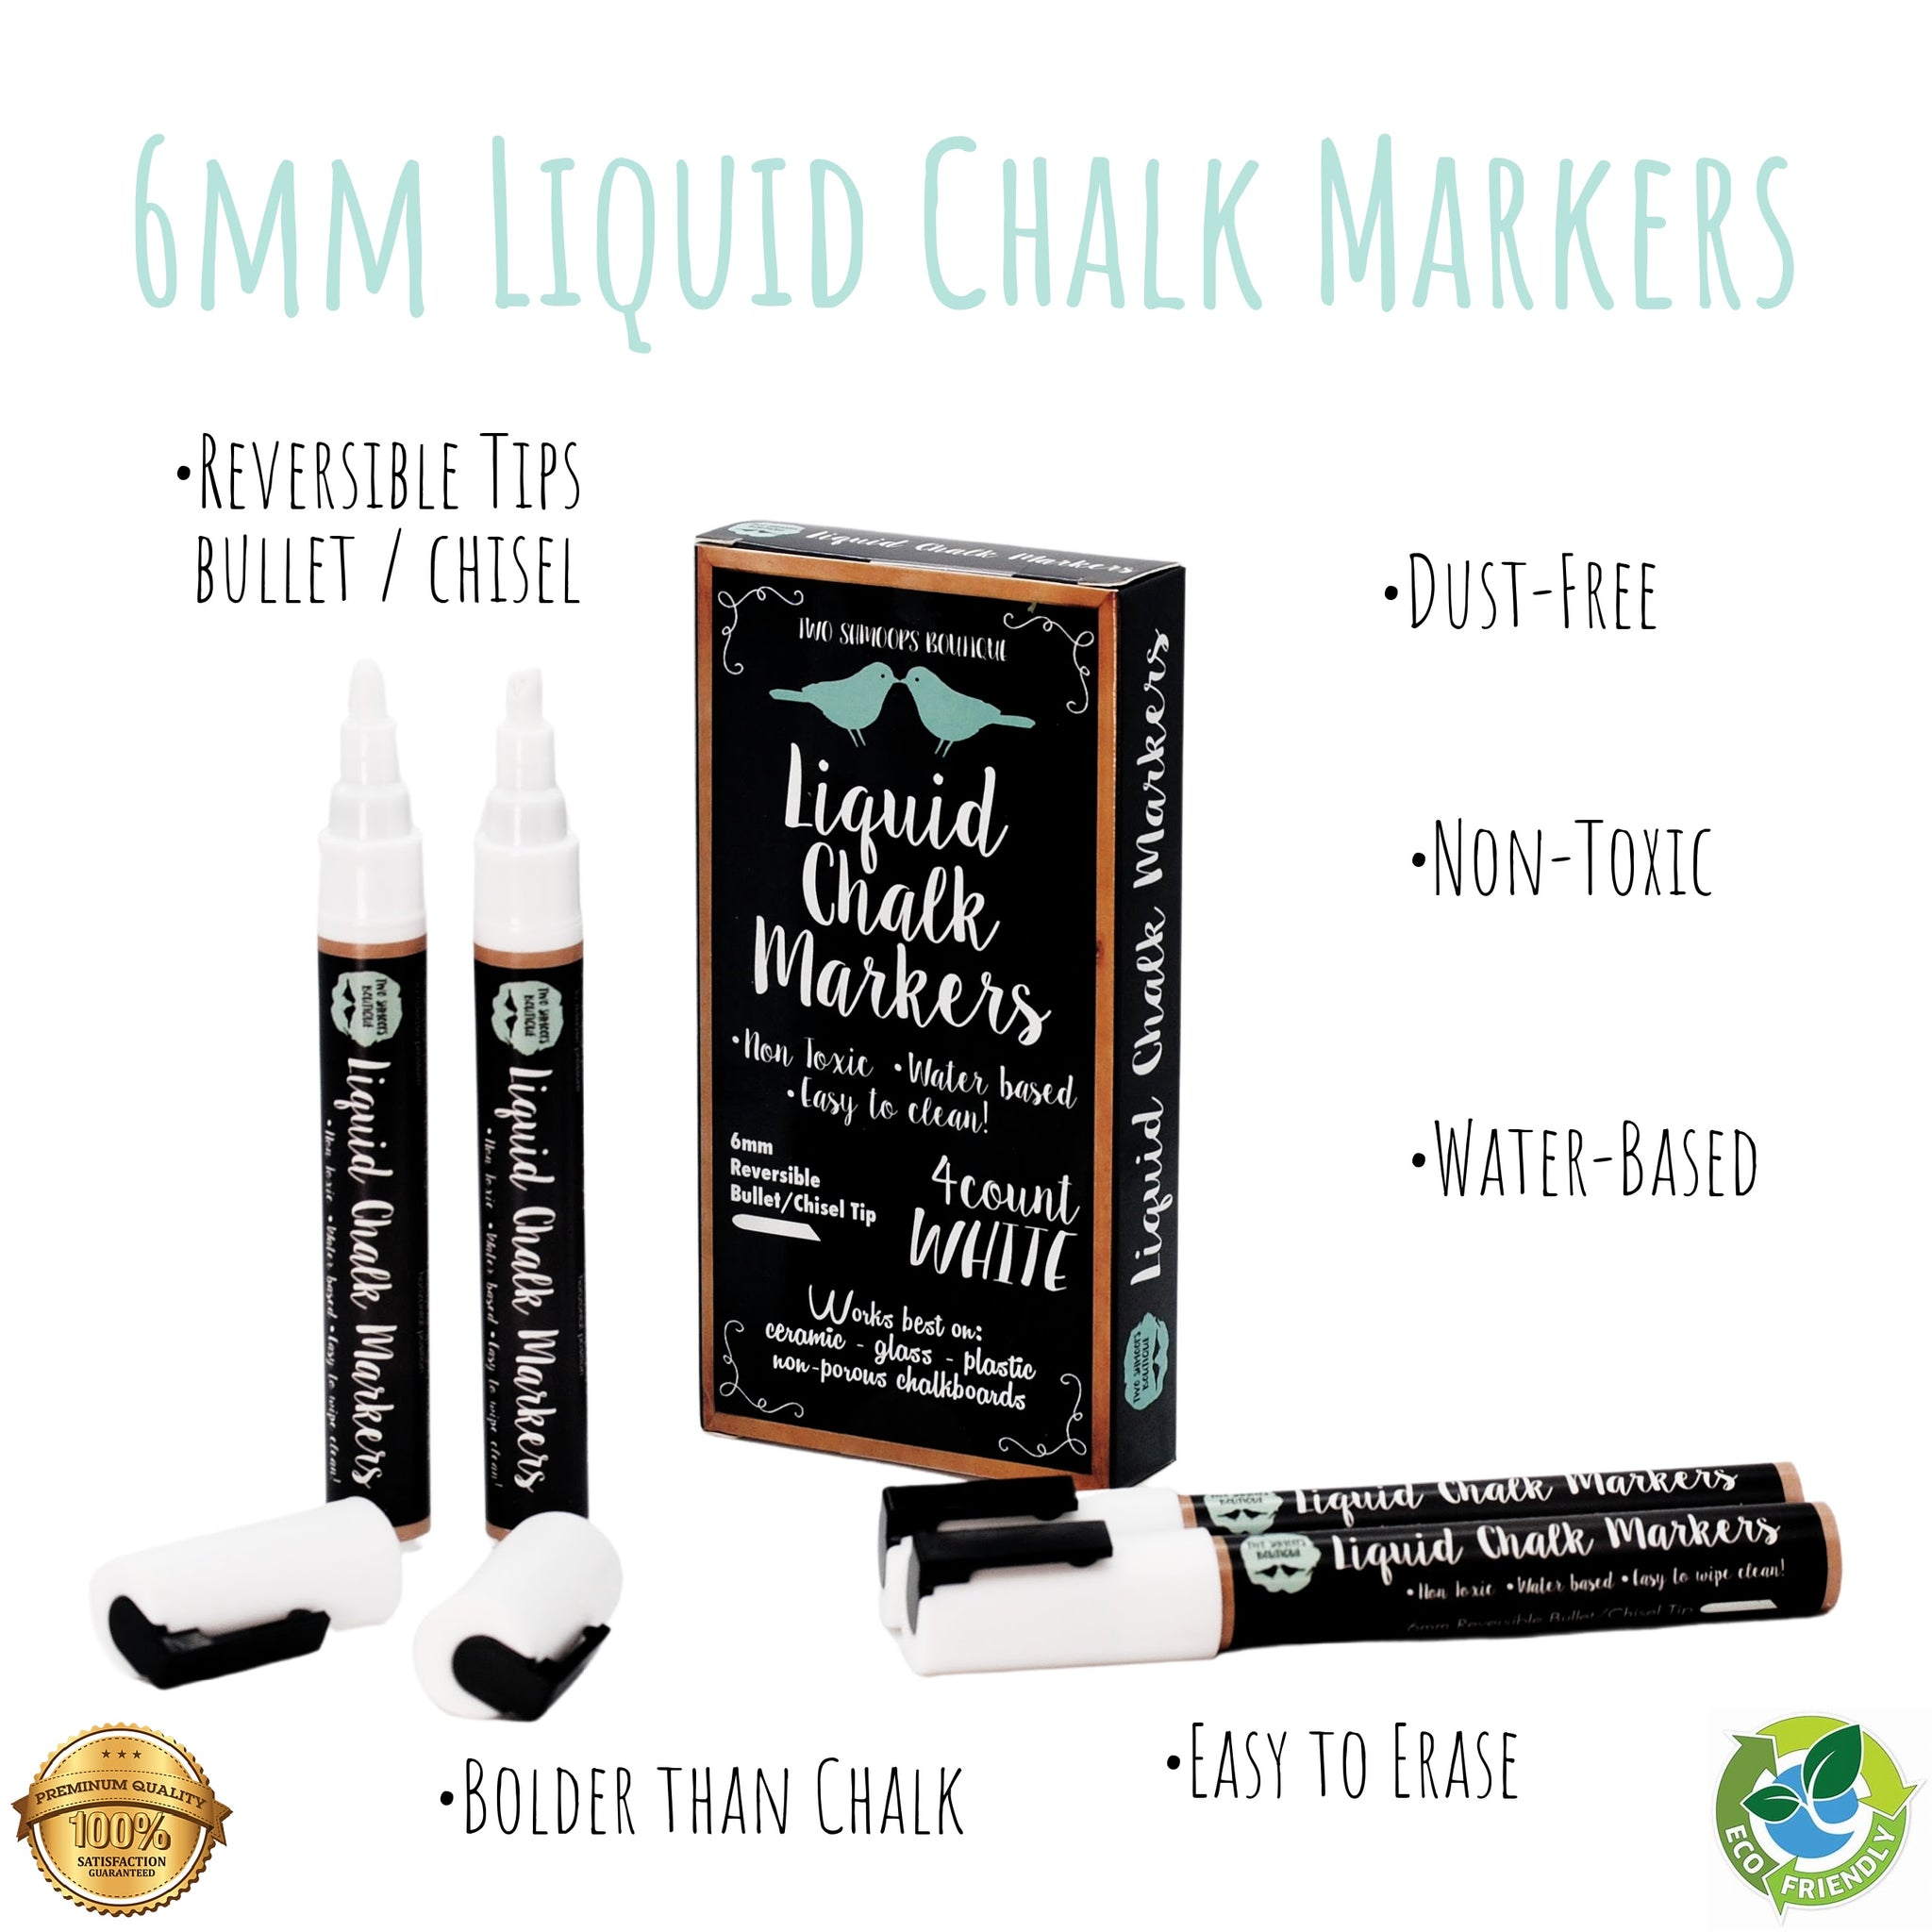 White Liquid Chalk Markers - 4 Pack   – Two Shmoops  Boutique